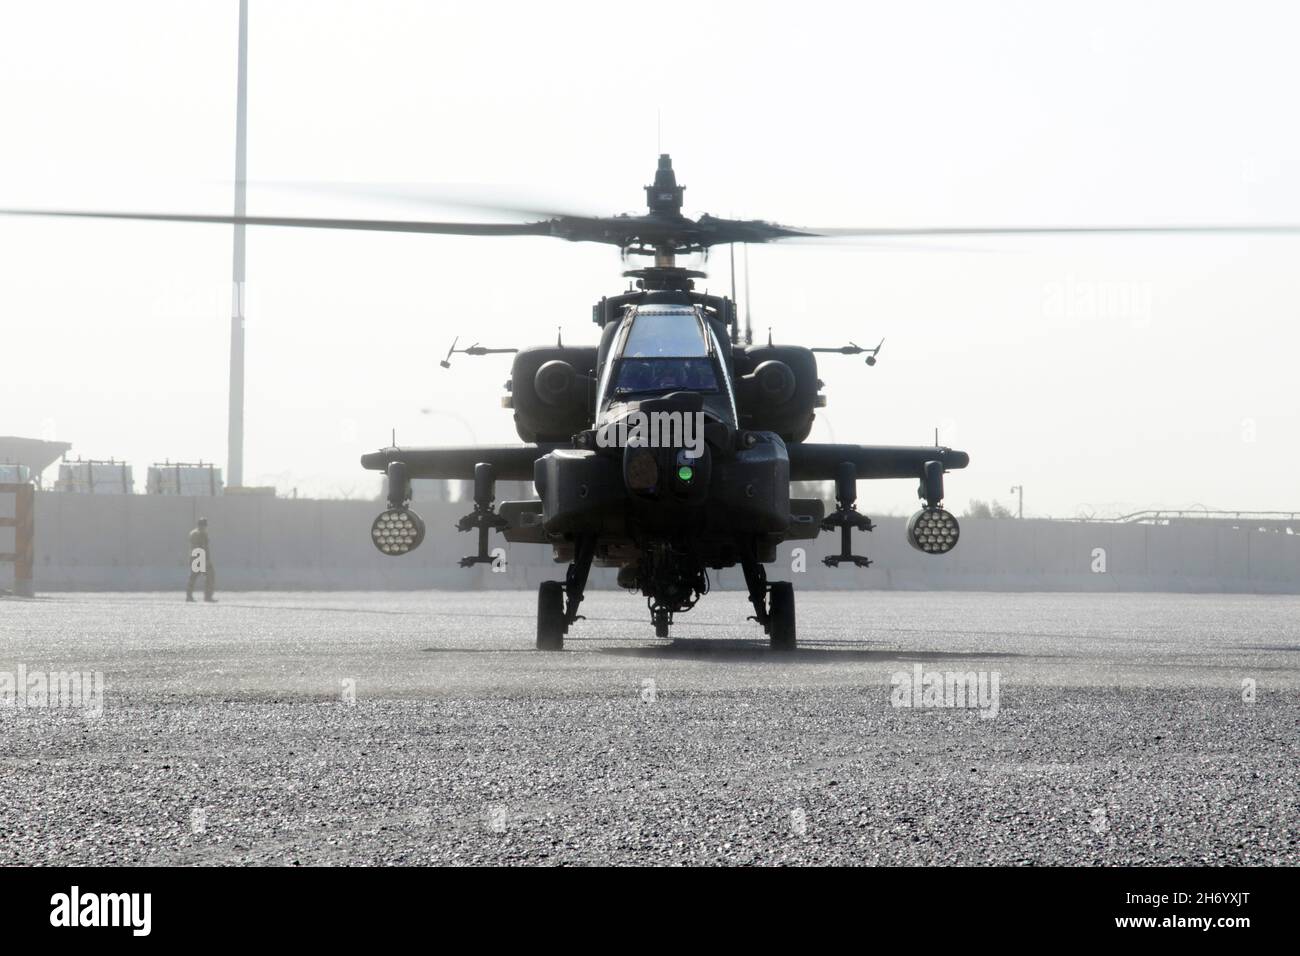 An AH-64E Apache helicopter assigned to the Fort Bragg, North Carolina, based 82nd Combat Aviation Brigade, 82nd Airborne Division, lands at the Port of Shuaiba, Kuwait, Nov. 10, 2021, in preparation for retrograde operations. The Aberdeen Proving Ground, Maryland, based 1100th Theater Aviation Sustainment Maintenance Group oversaw the preparations for the retrograde of more than 30 aircraft assigned to the 82nd CAB from Nov. 7-12. The Soldiers and aircraft were deployed to Afghanistan to support base closures and the U.S. military’s exit from the Hamid Karzai International Airport in Kabul. Stock Photo